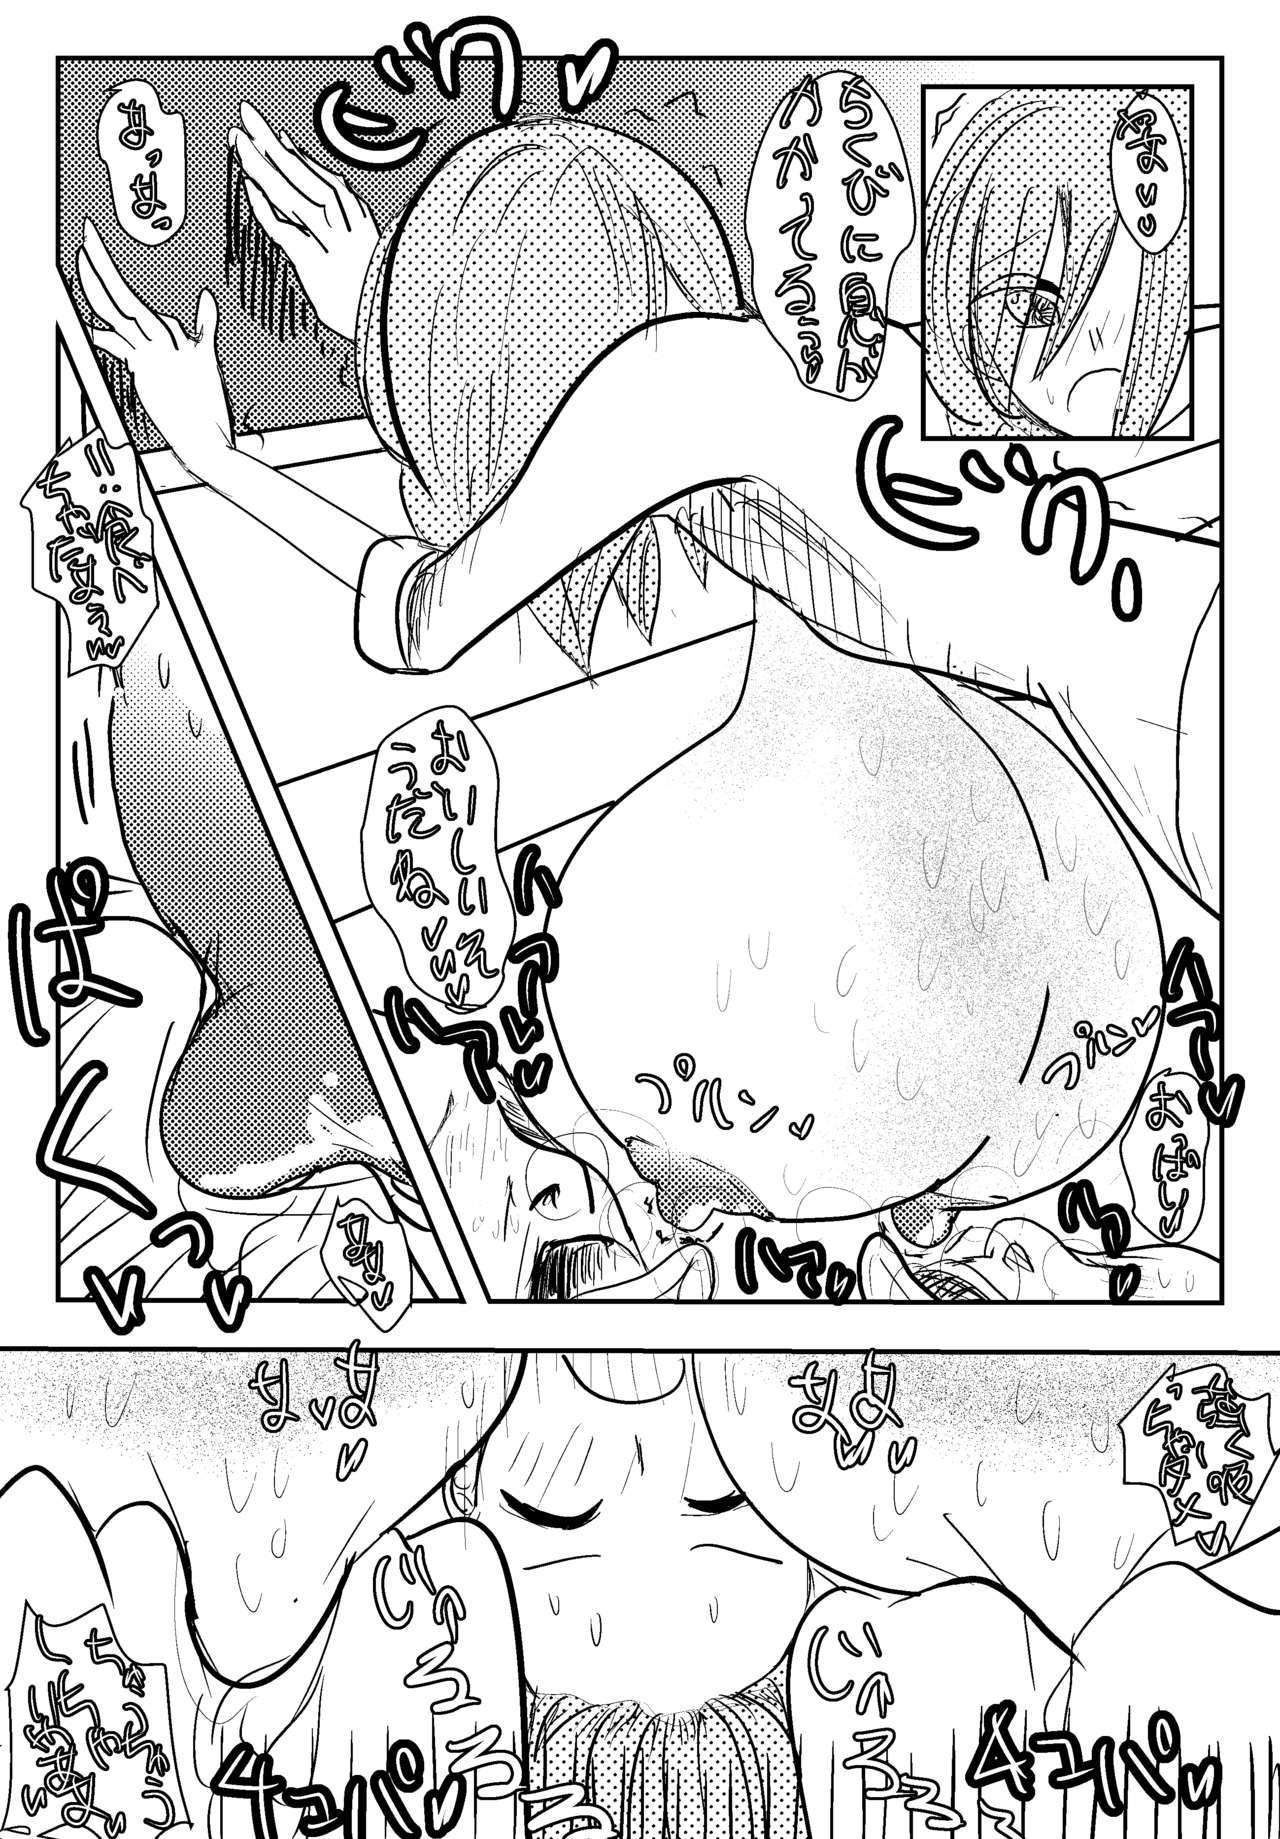 Dick Sucking 両乳首吸われて喘いじゃう爆乳OL Friends - Page 6